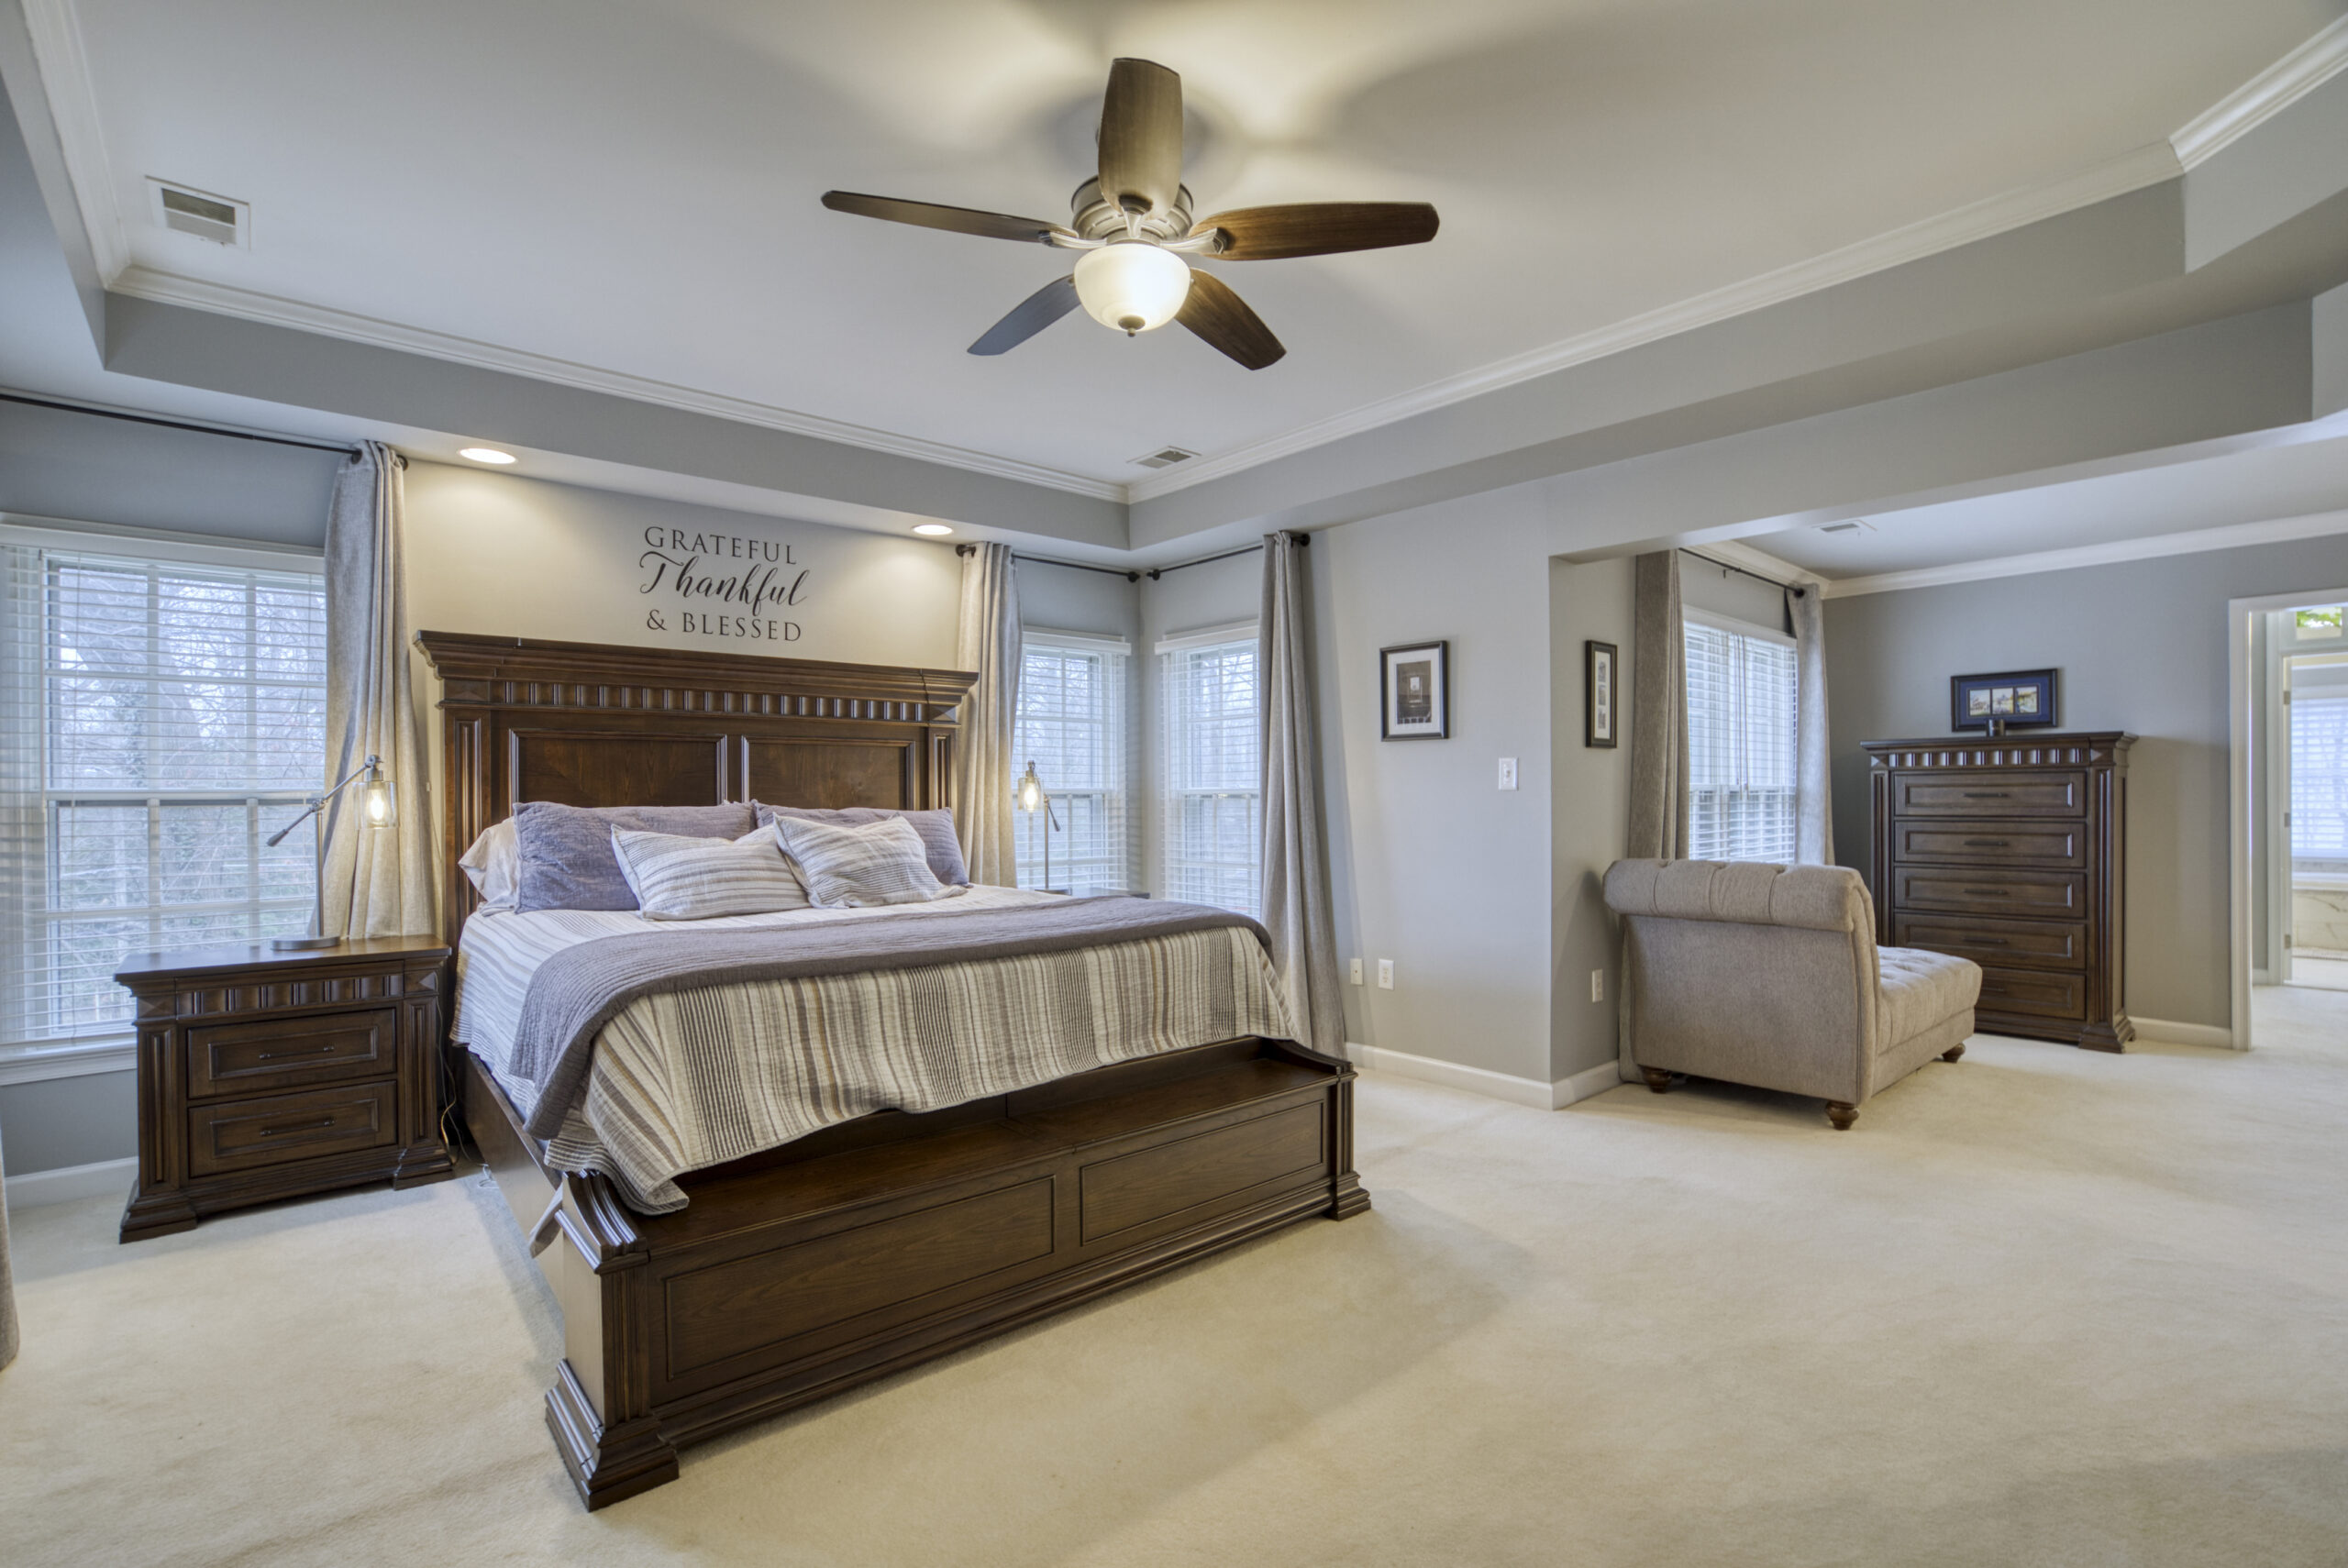 Professional interior photo of 9701 Chilcott Manor Way - showing the primary bedroom suite